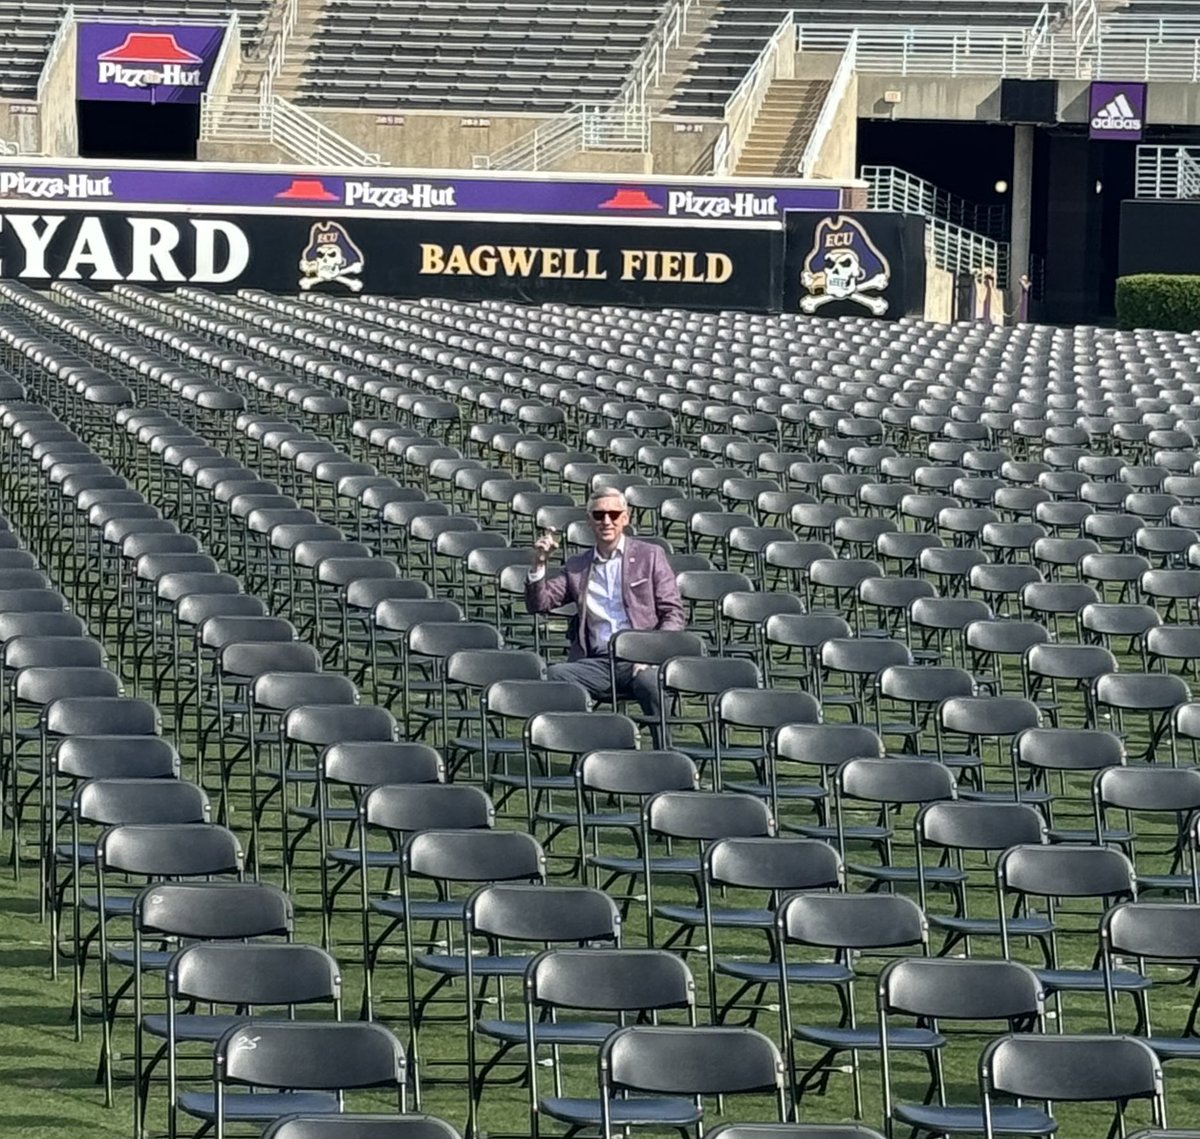 The stage is set, the chairs are placed…

#ECU24, ARRRGH you ready? 😎